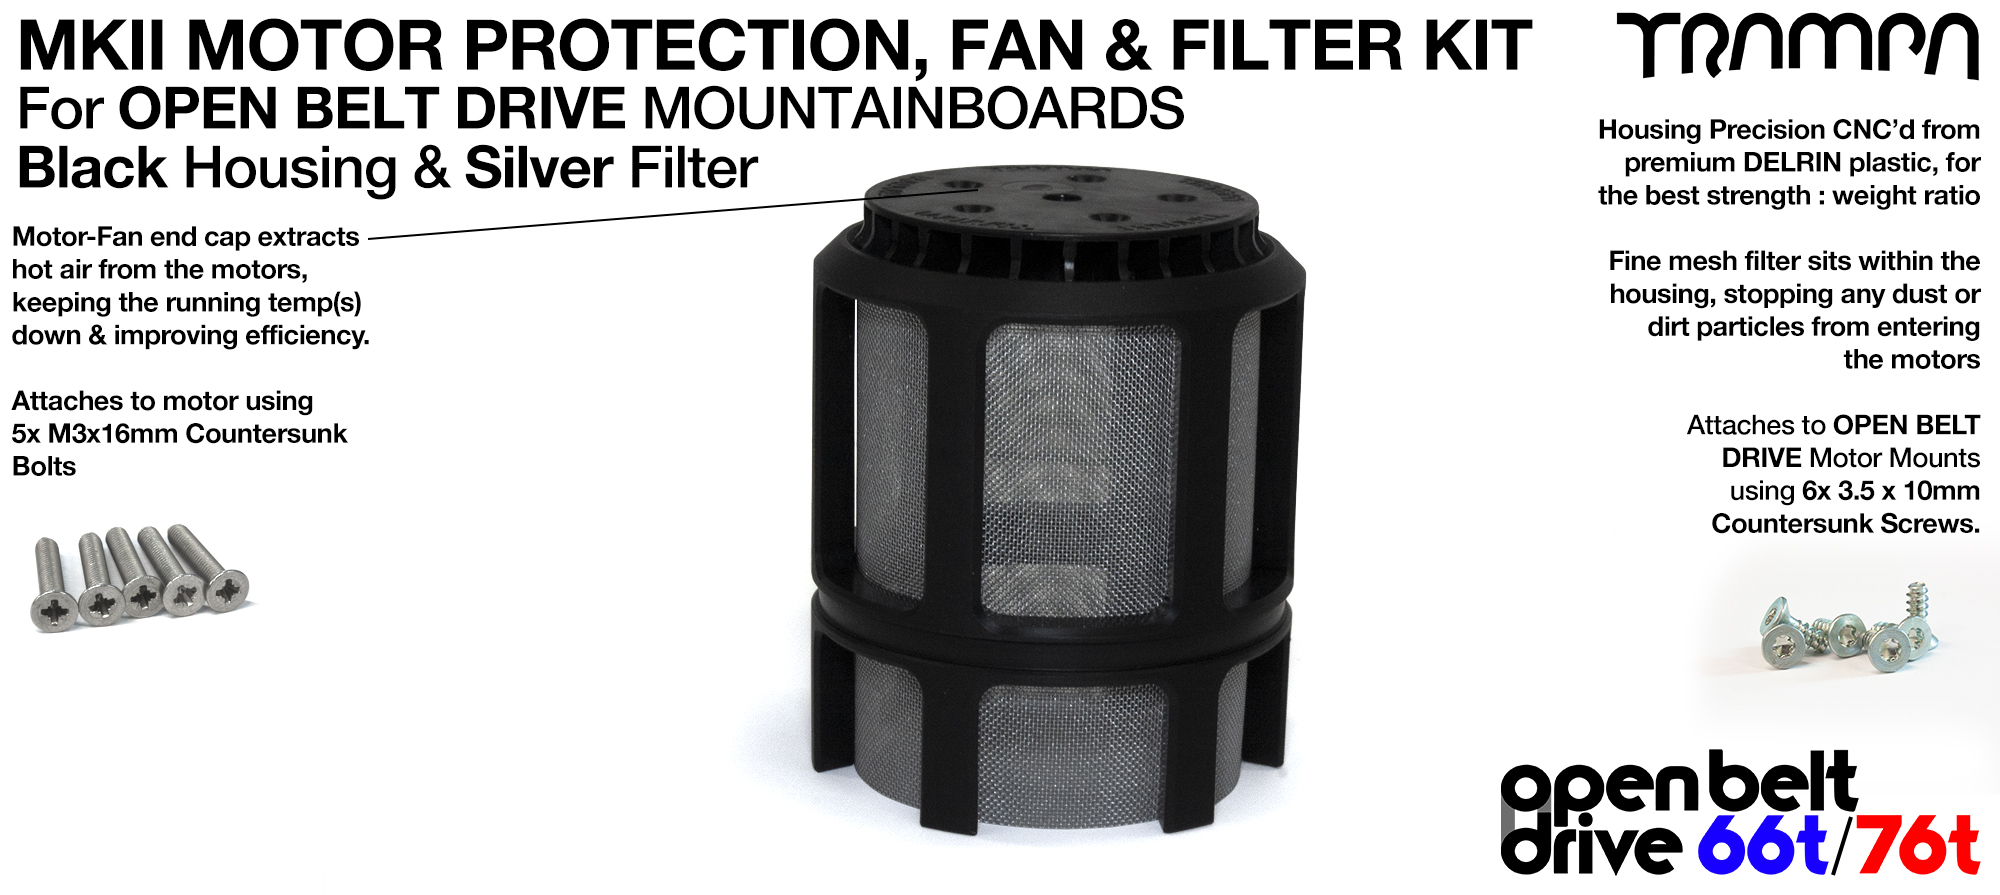 FULL CAGE Motor protection SUPER STRONG DELRIN Plastic includes Fan & SILVER Filter - SINGLE